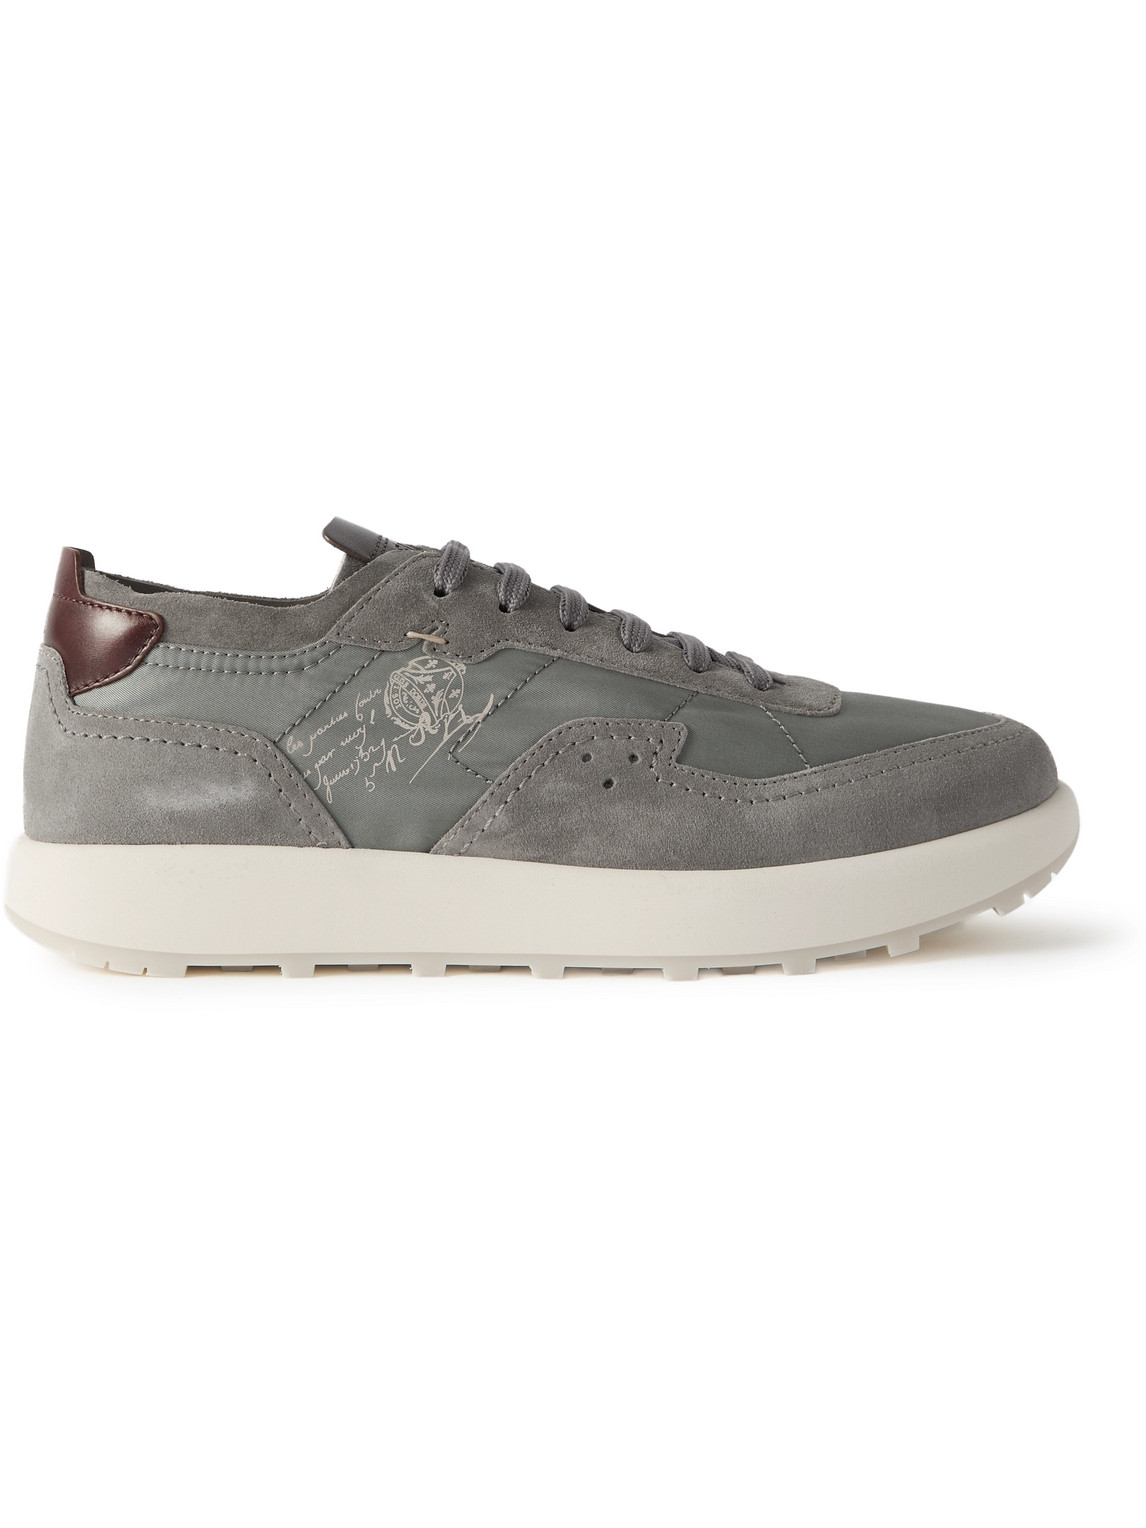 Light Track Venezia Leather-Trimmed Nylon and Suede Sneakers